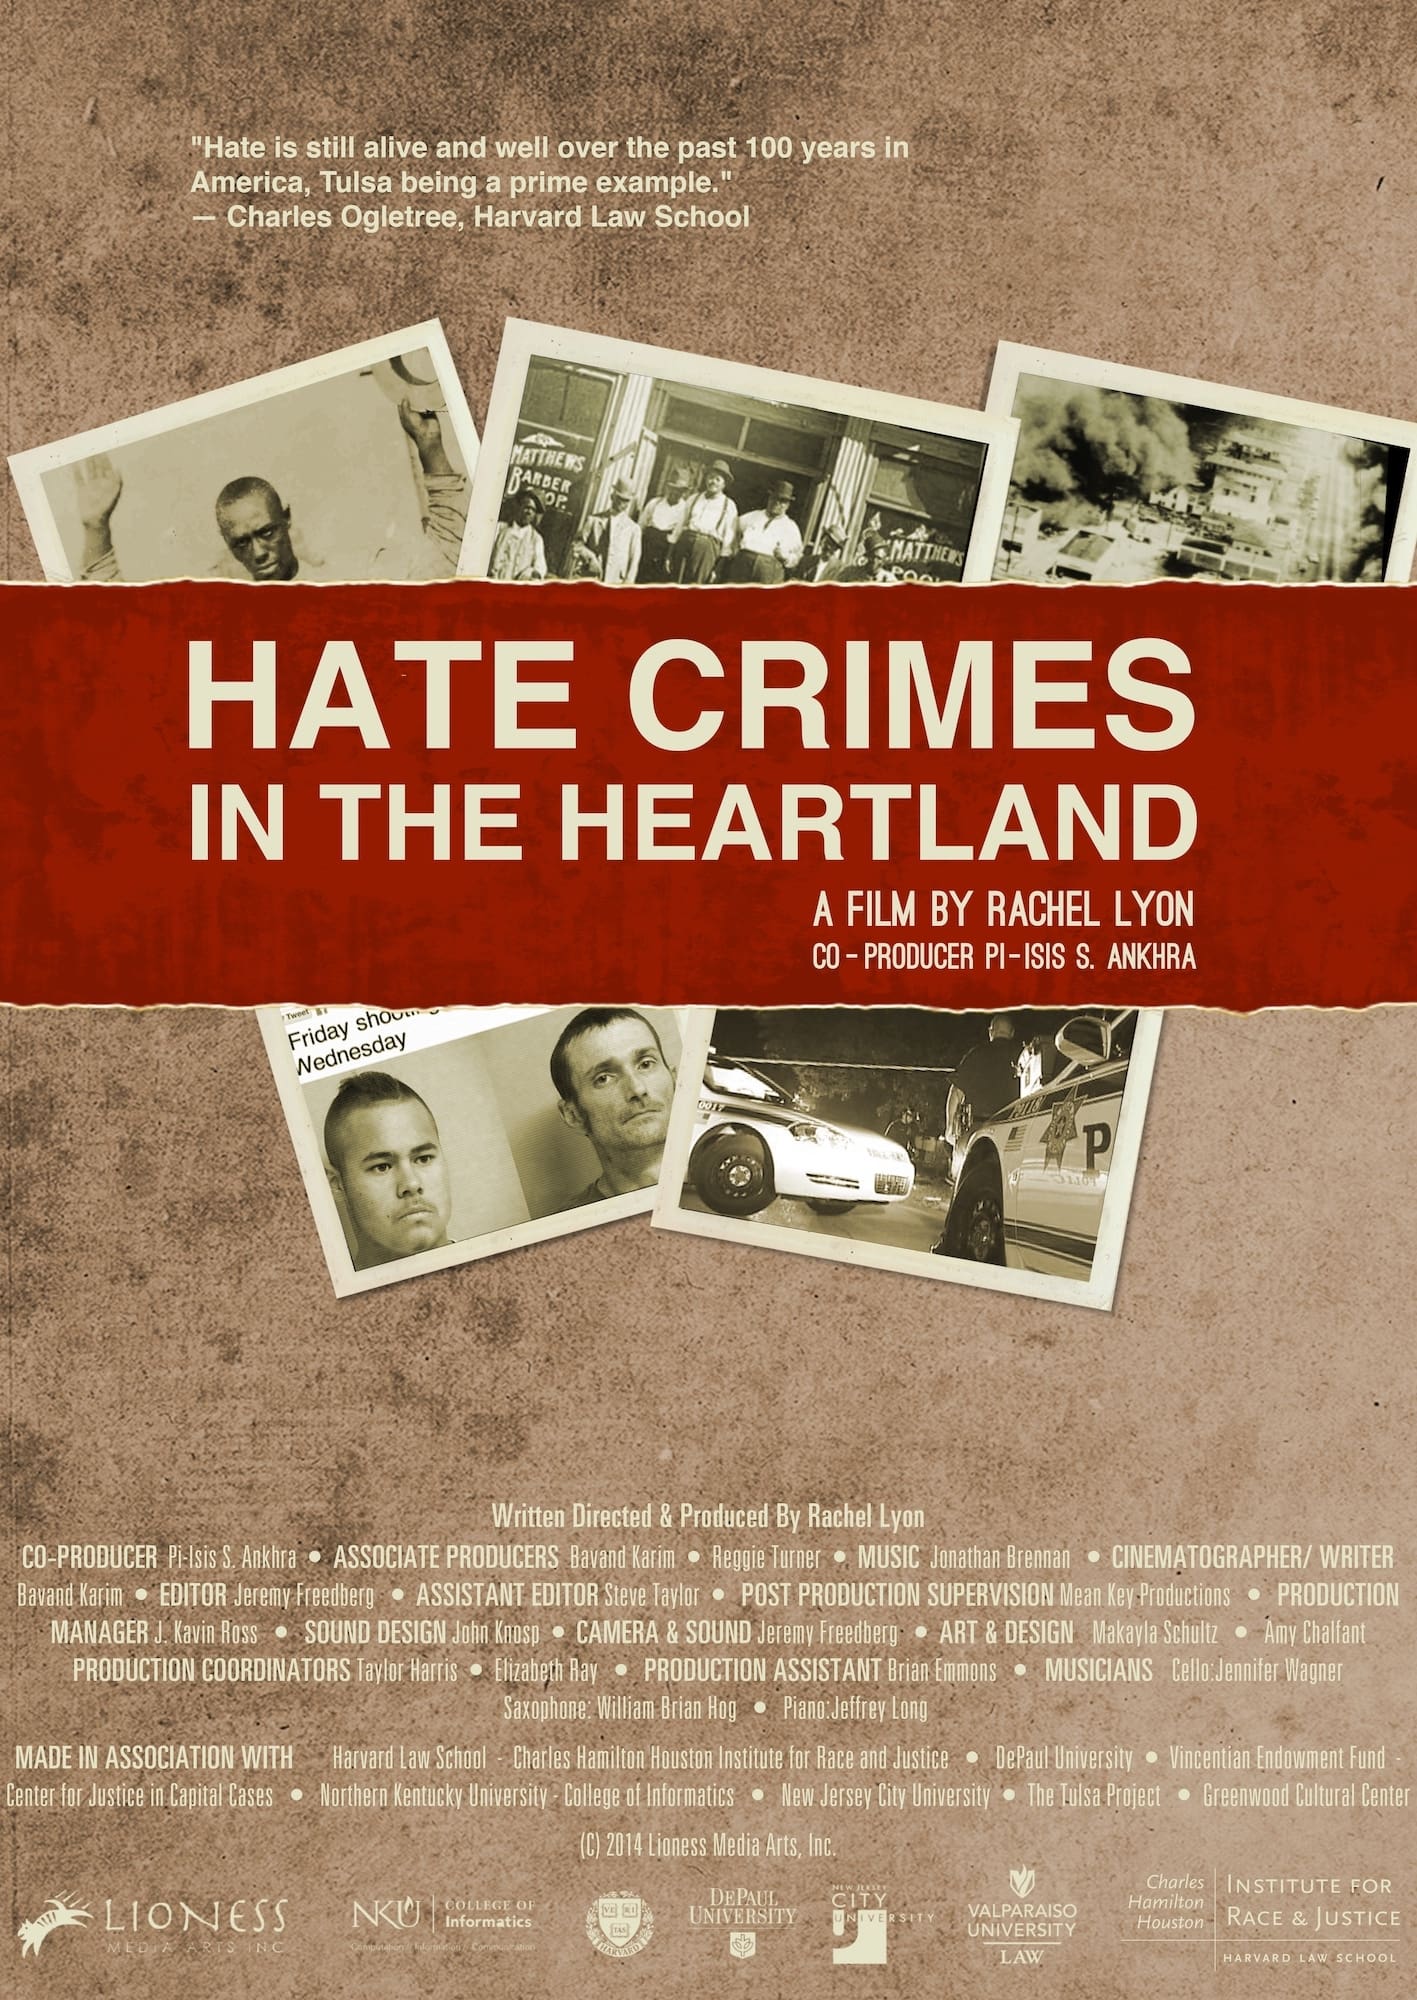 Hate Crimes in the Heartland